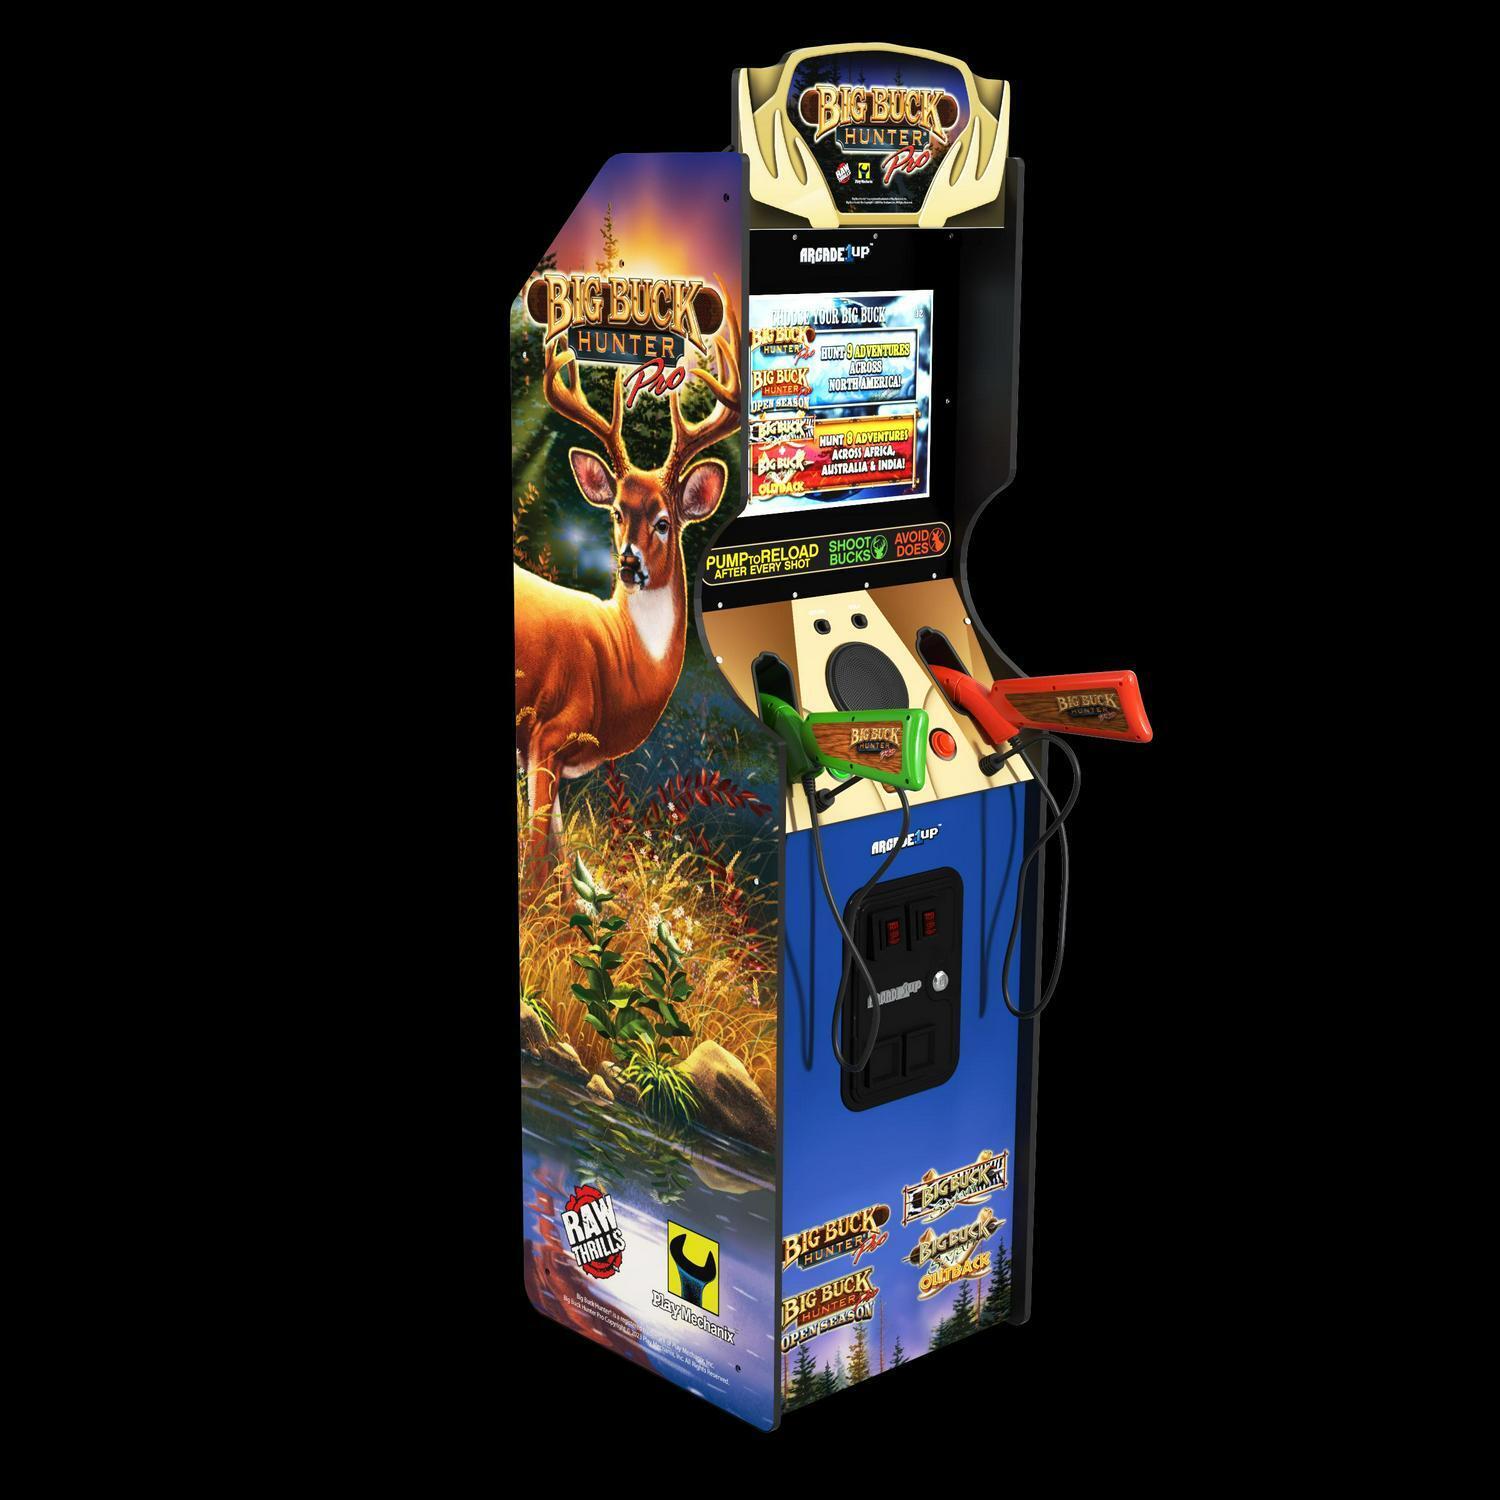 Arcade1Up Big Buck Hunter Pro Deluxe Arcade Machine, built for your home, 4 and